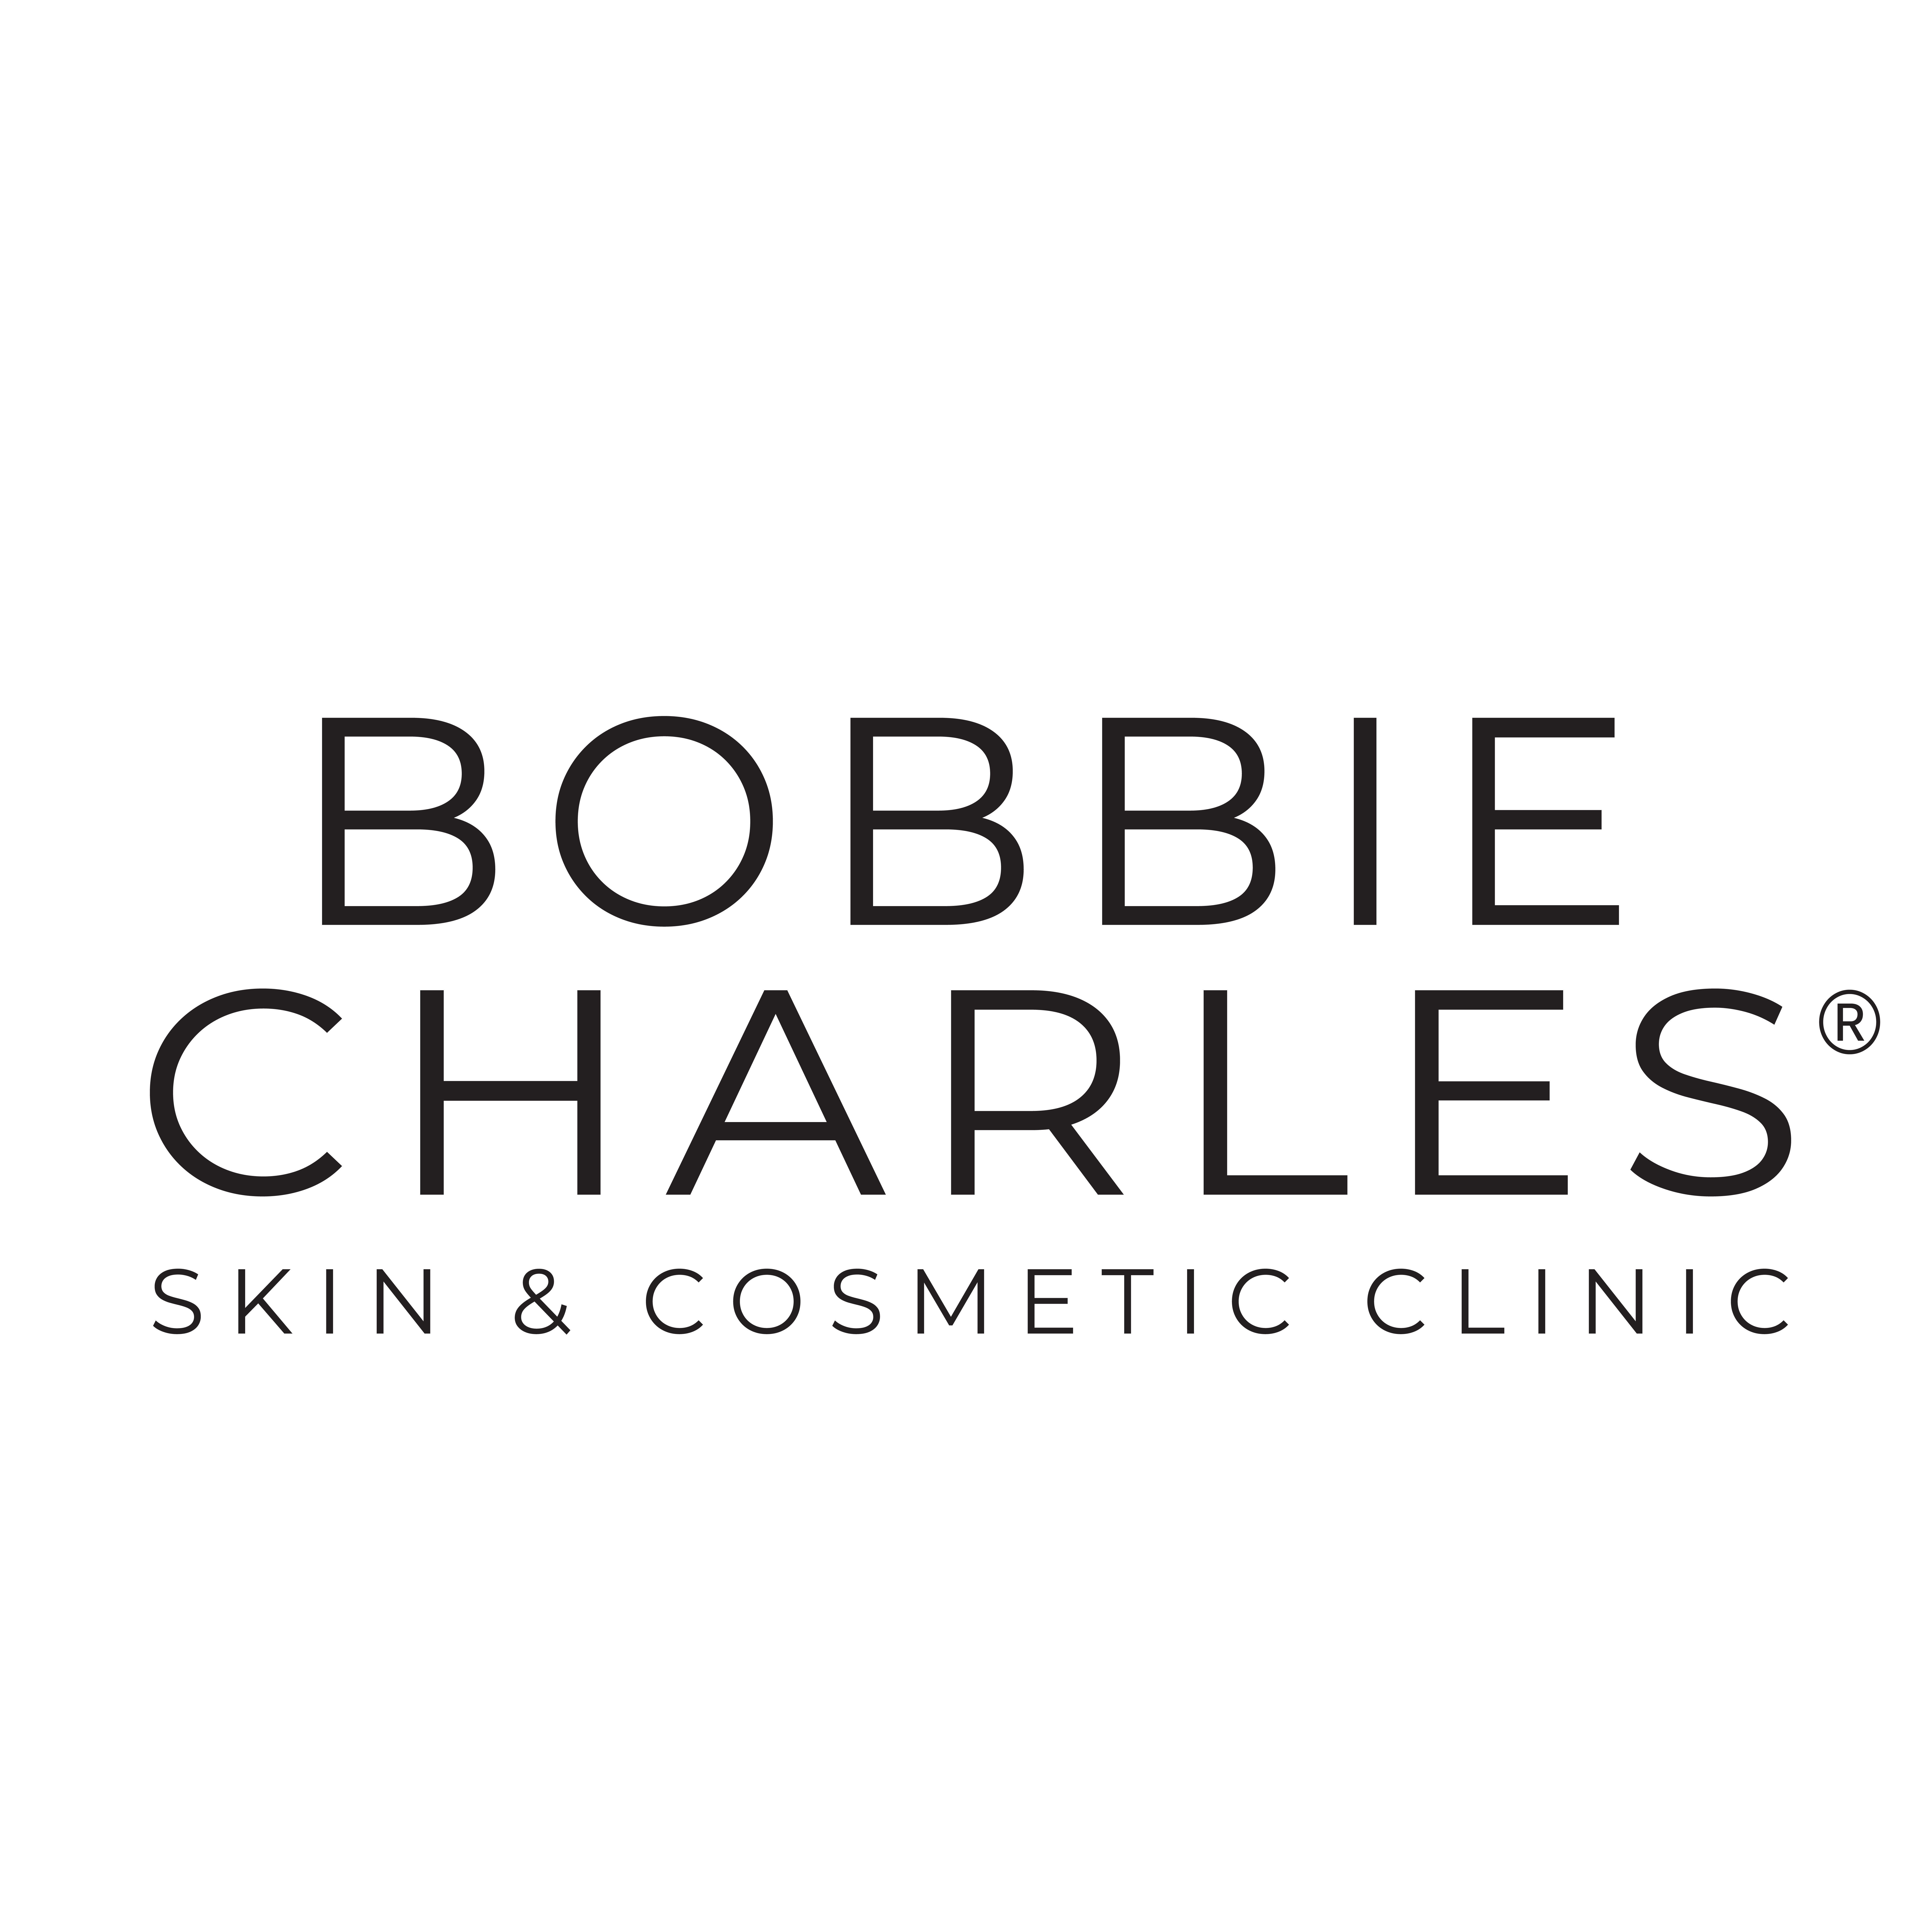 Bobbie Charles Skin and Cosmetic Clinic